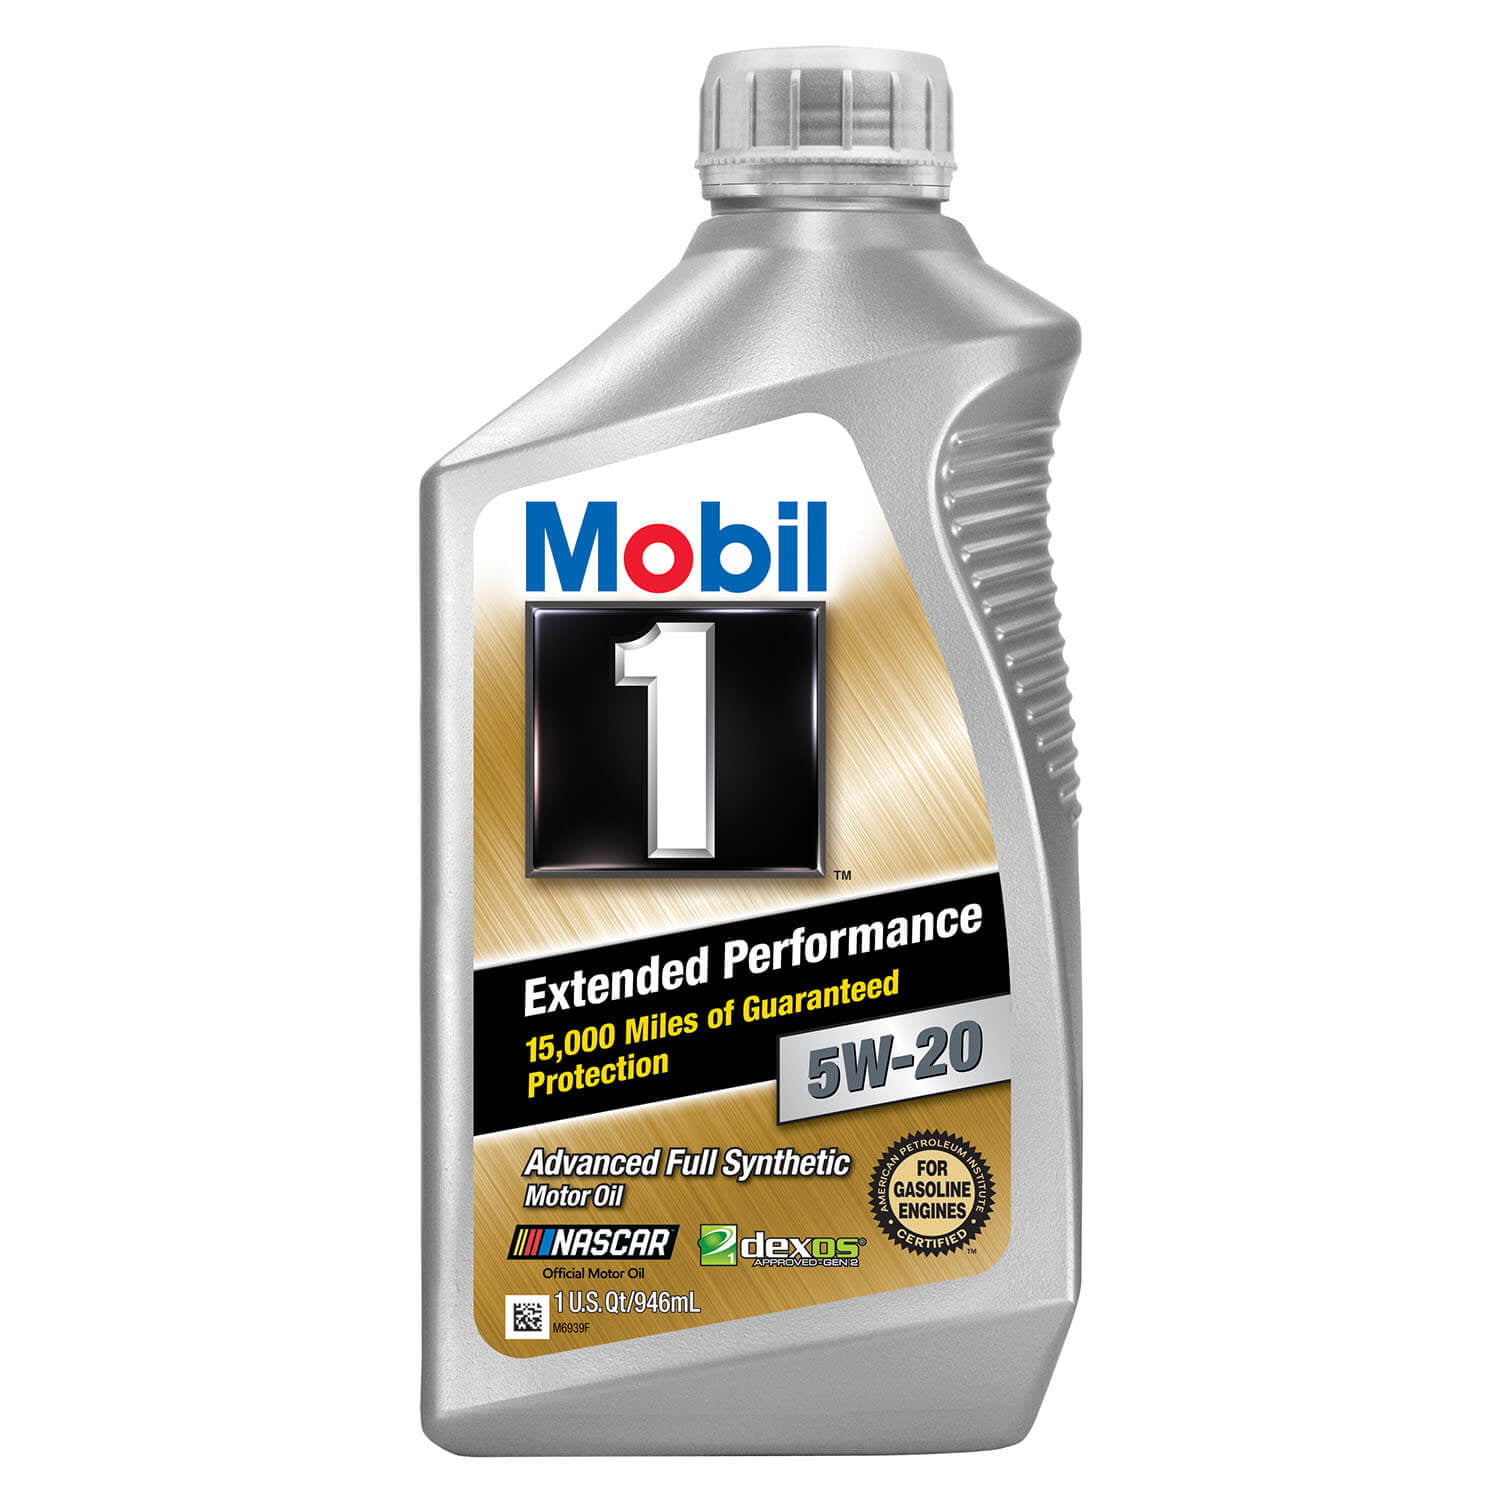 mobil-1-extended-performance-high-mileage-full-synthetic-motor-oil-5w